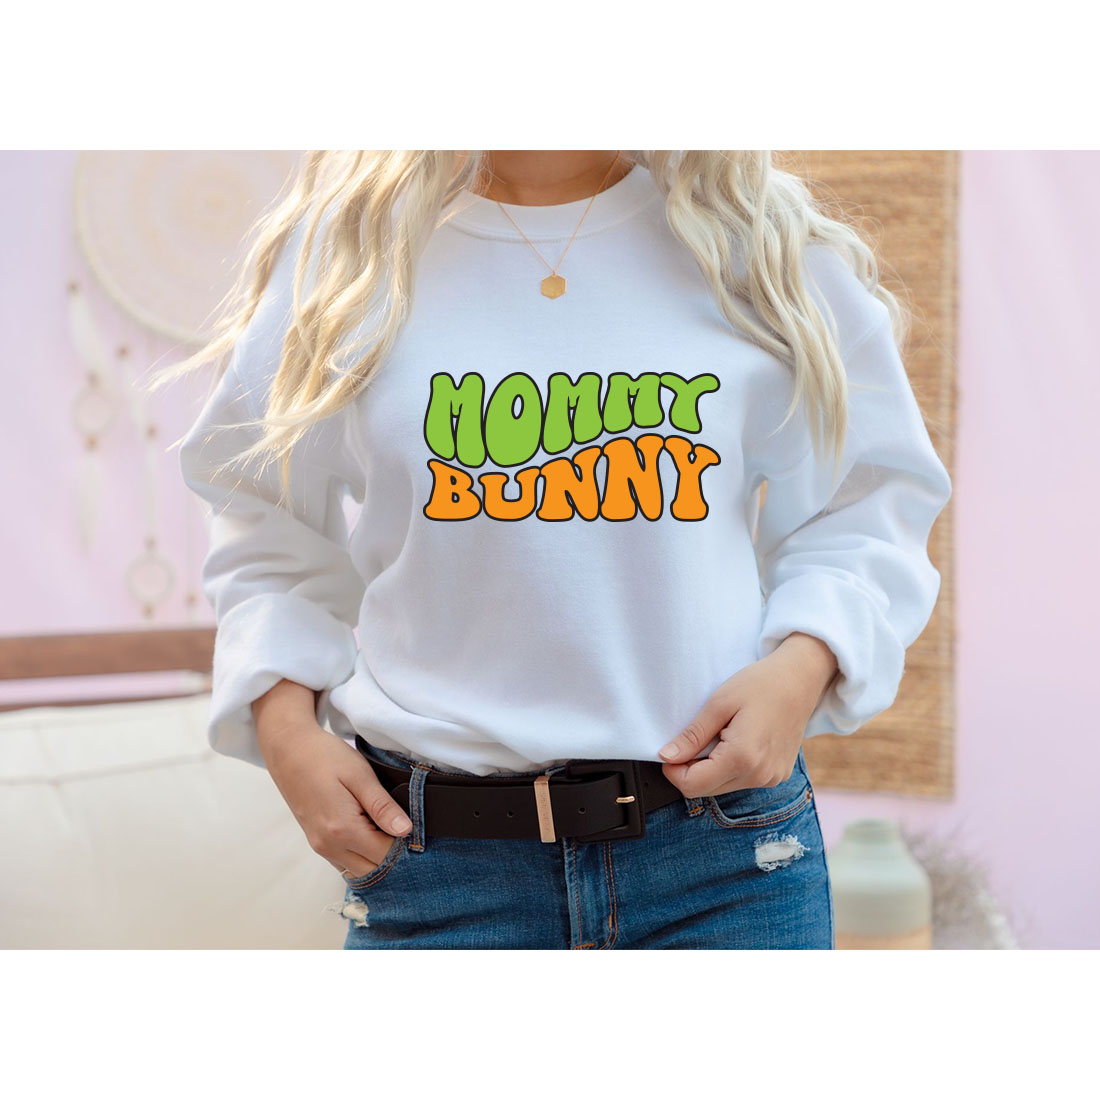 Mommy Bunny Retro T-Shirt Designs cover image.